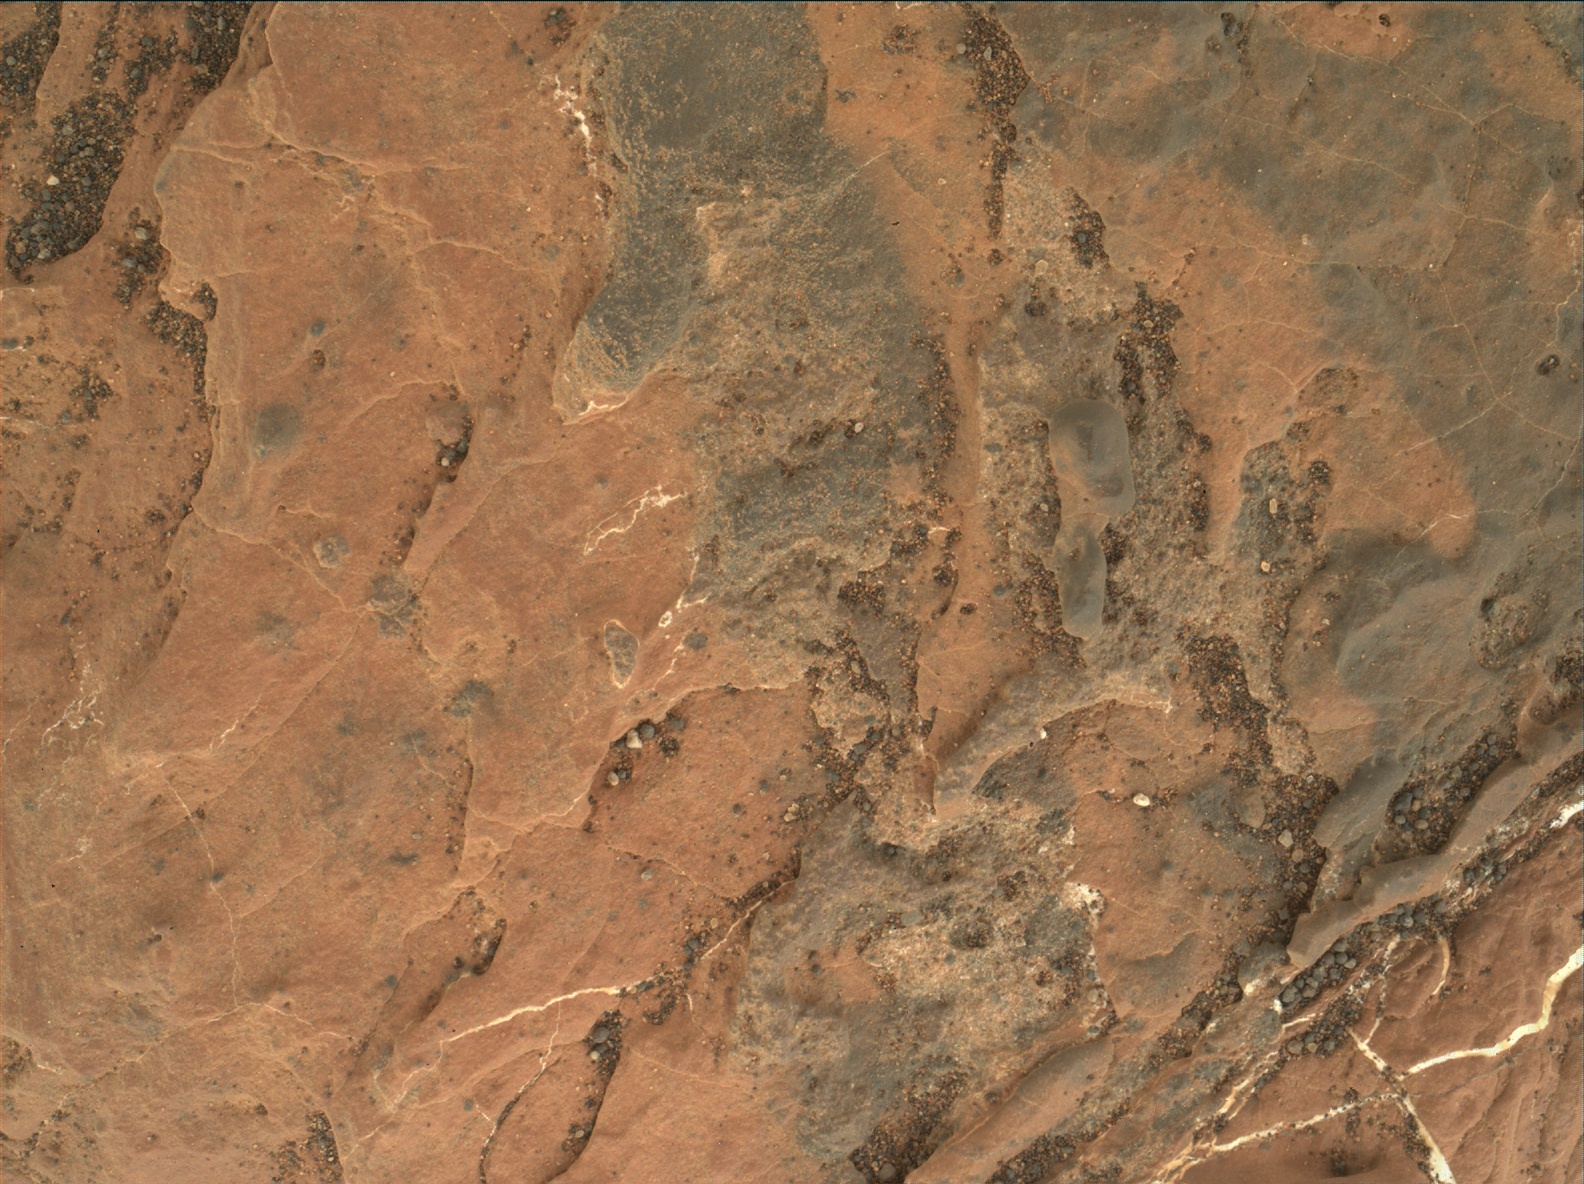 Nasa's Mars rover Curiosity acquired this image using its Mars Hand Lens Imager (MAHLI) on Sol 1611